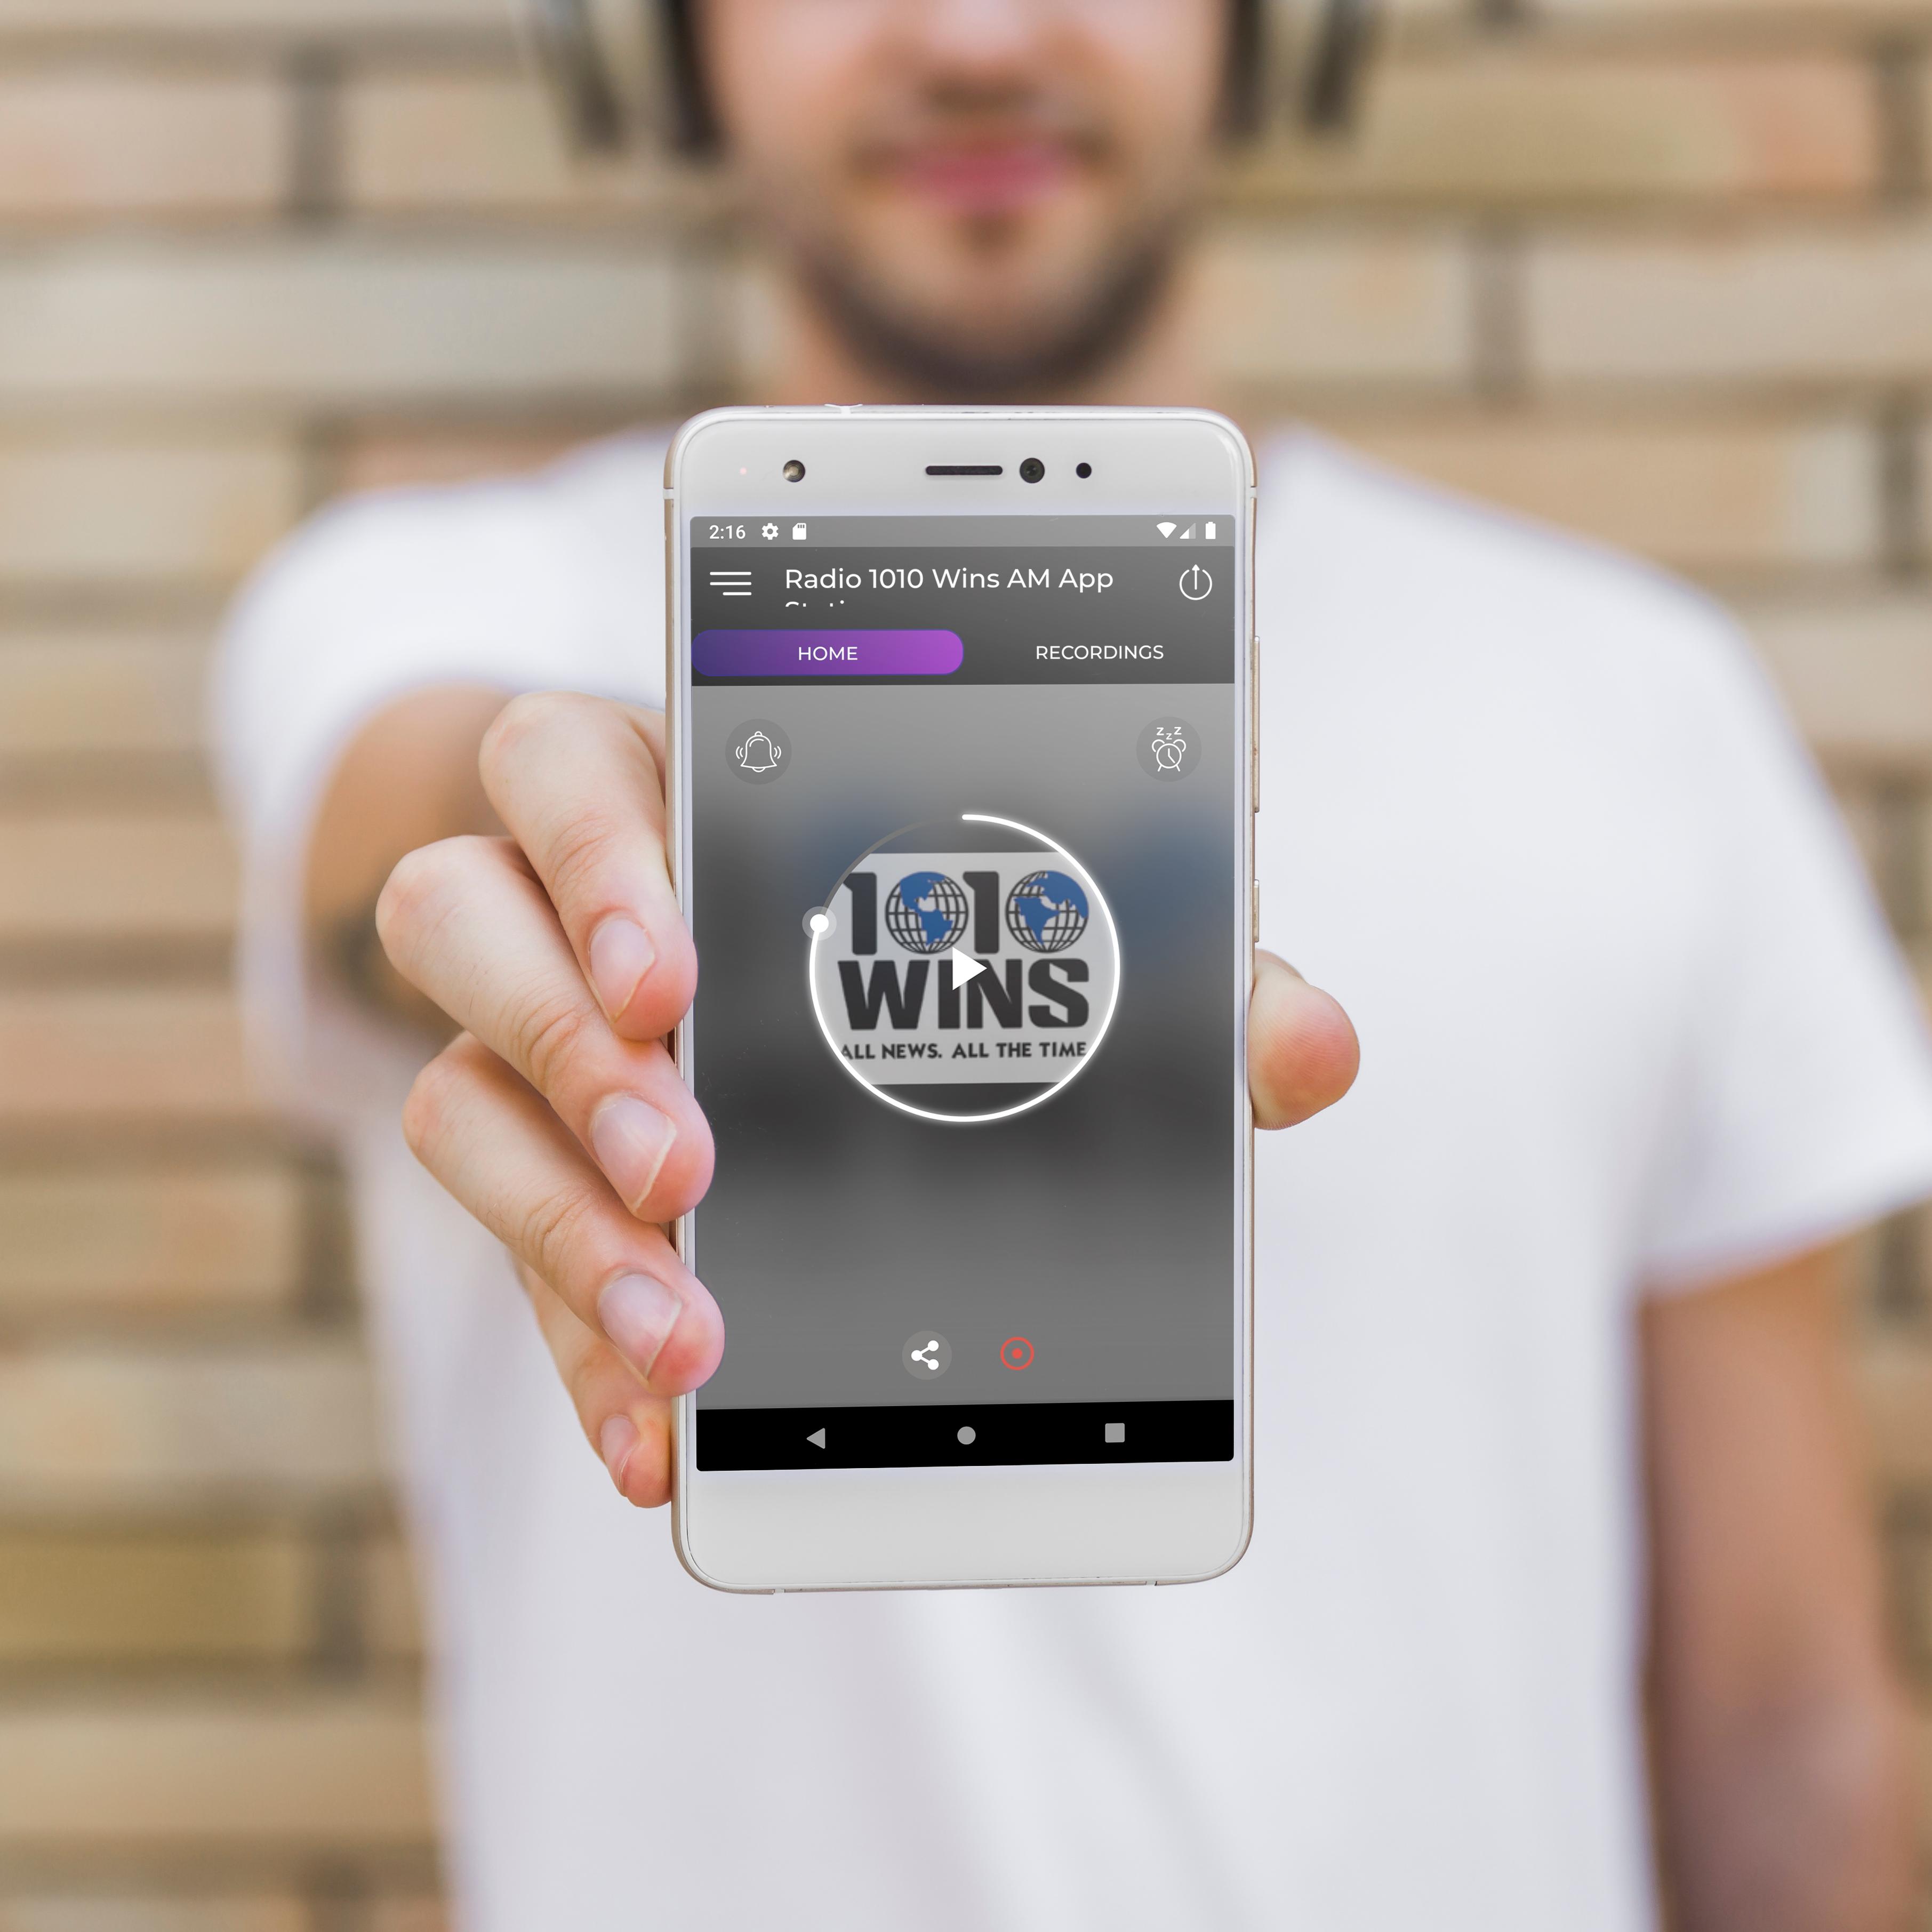 Radio 1010 Wins AM App Station + USA Free Online for Android - APK Download